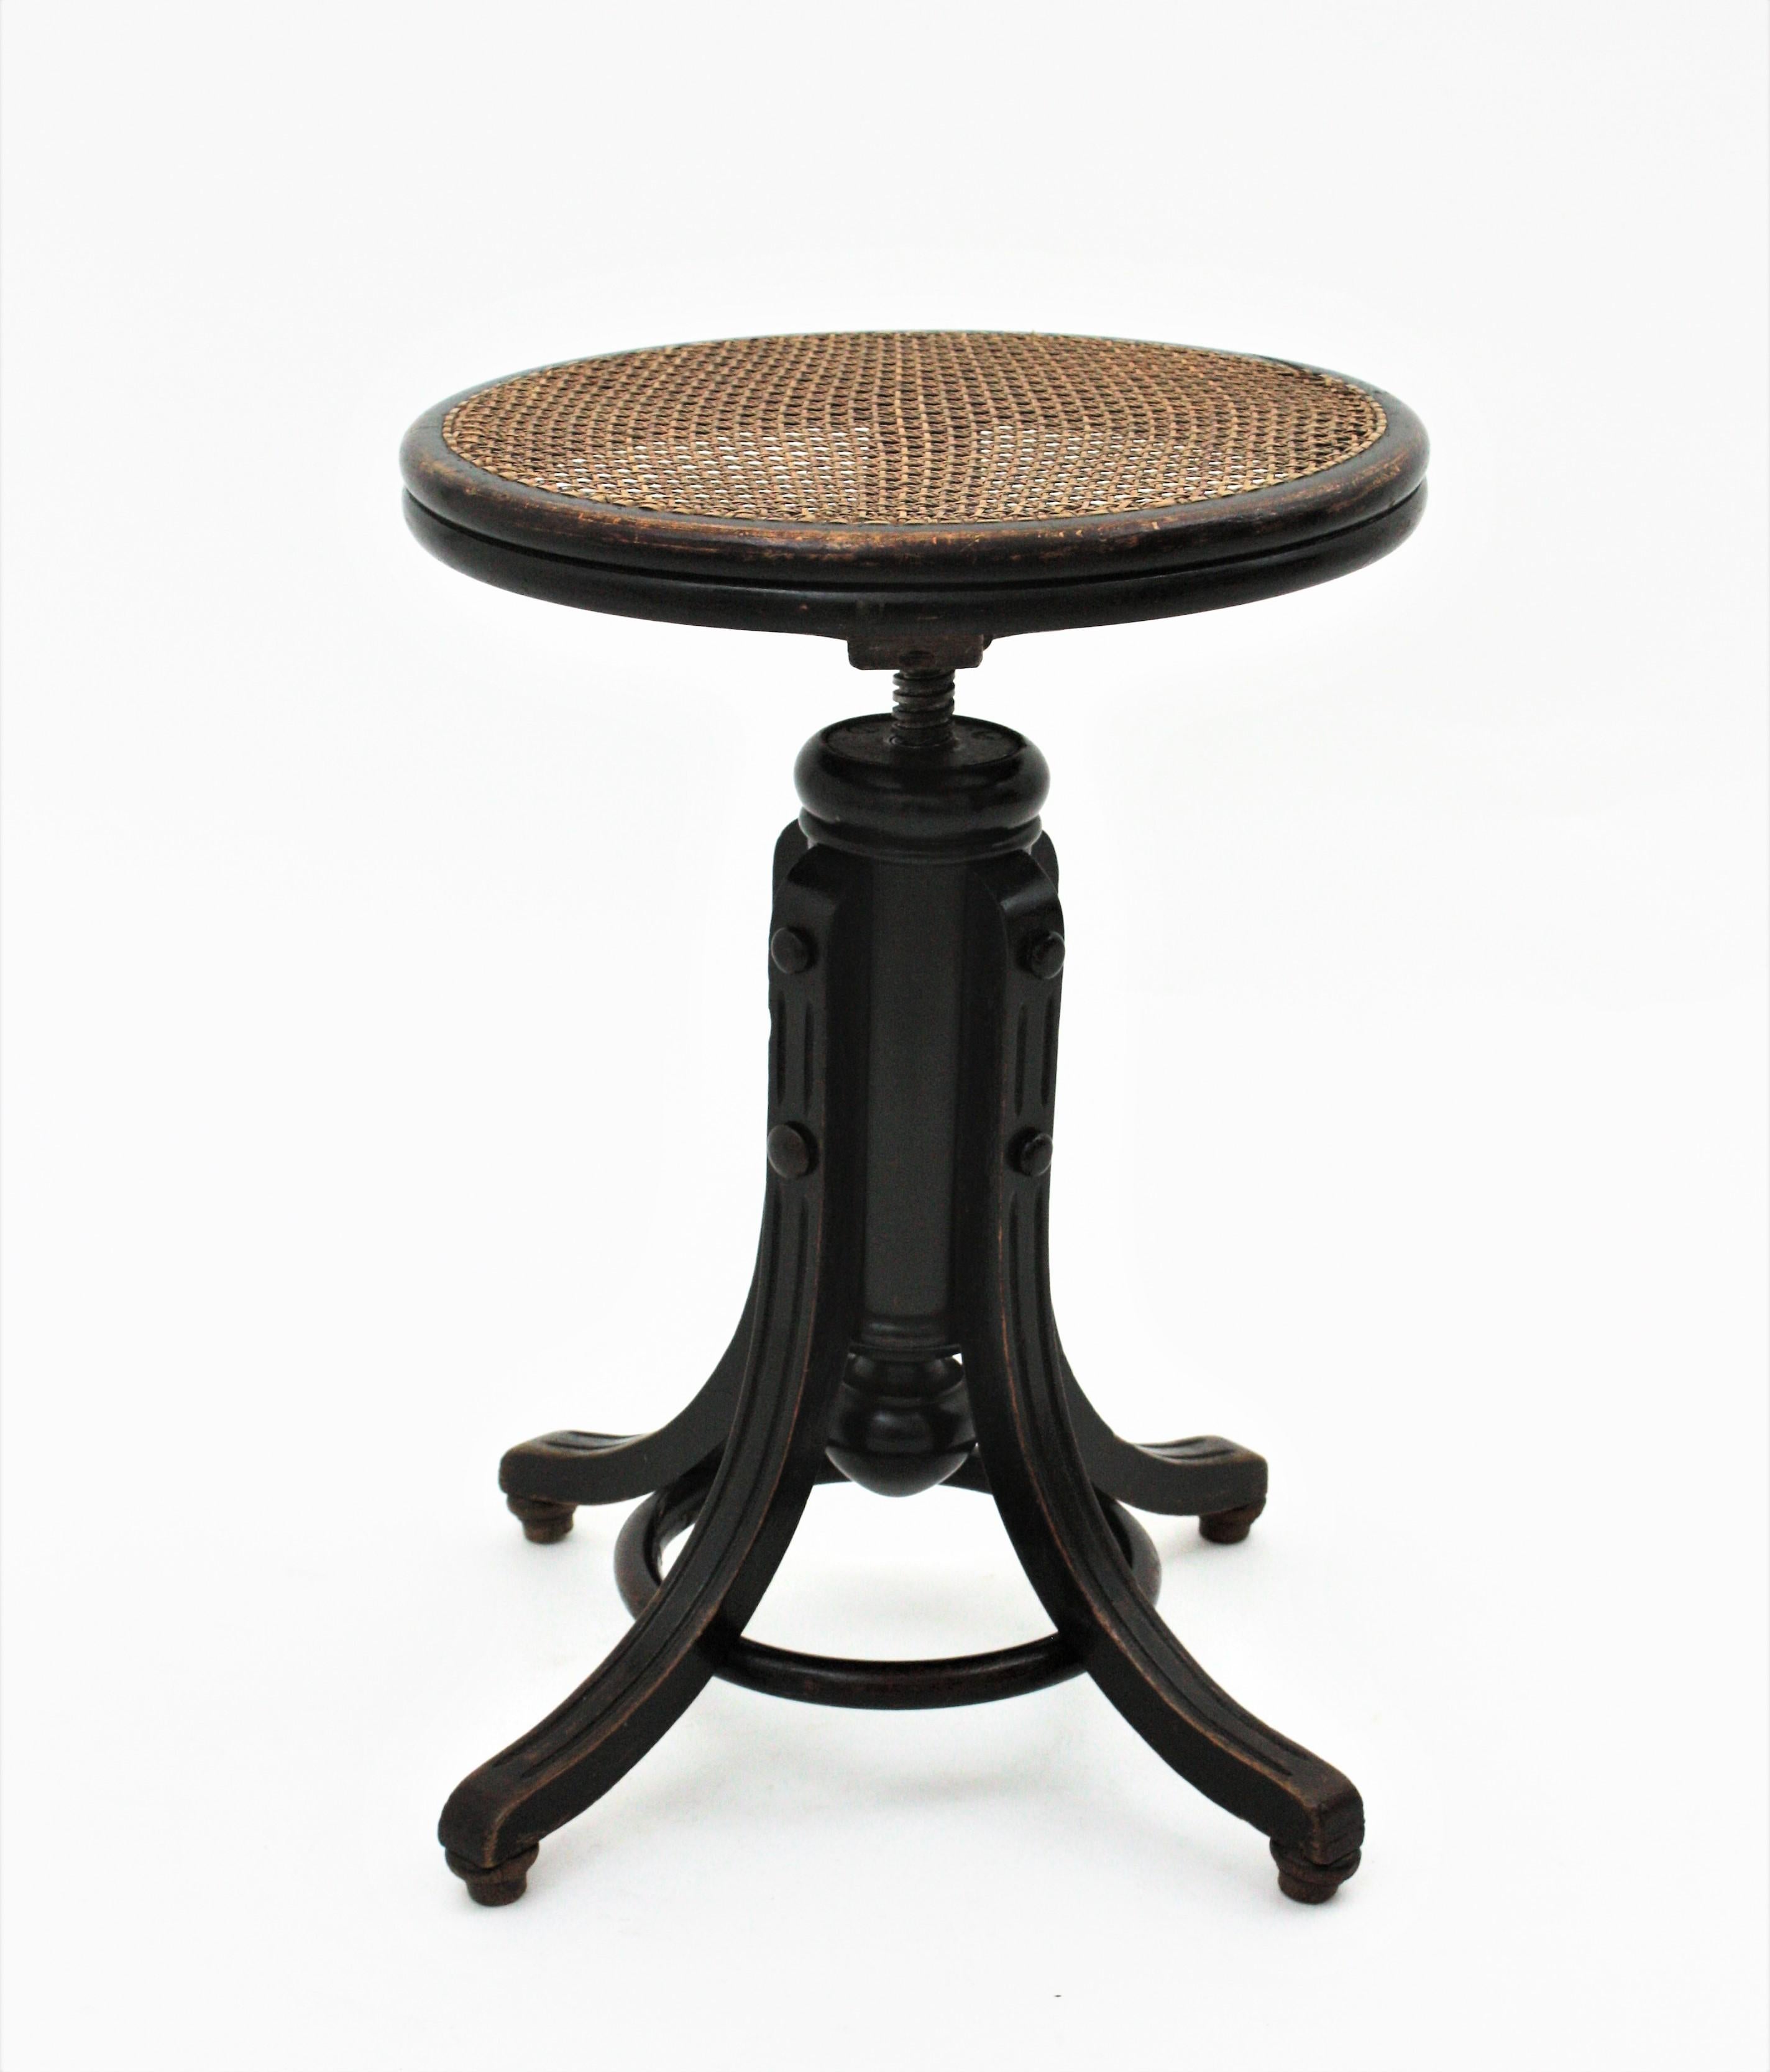 Thonet Style Revolving Stool with Cane Seat For Sale 4